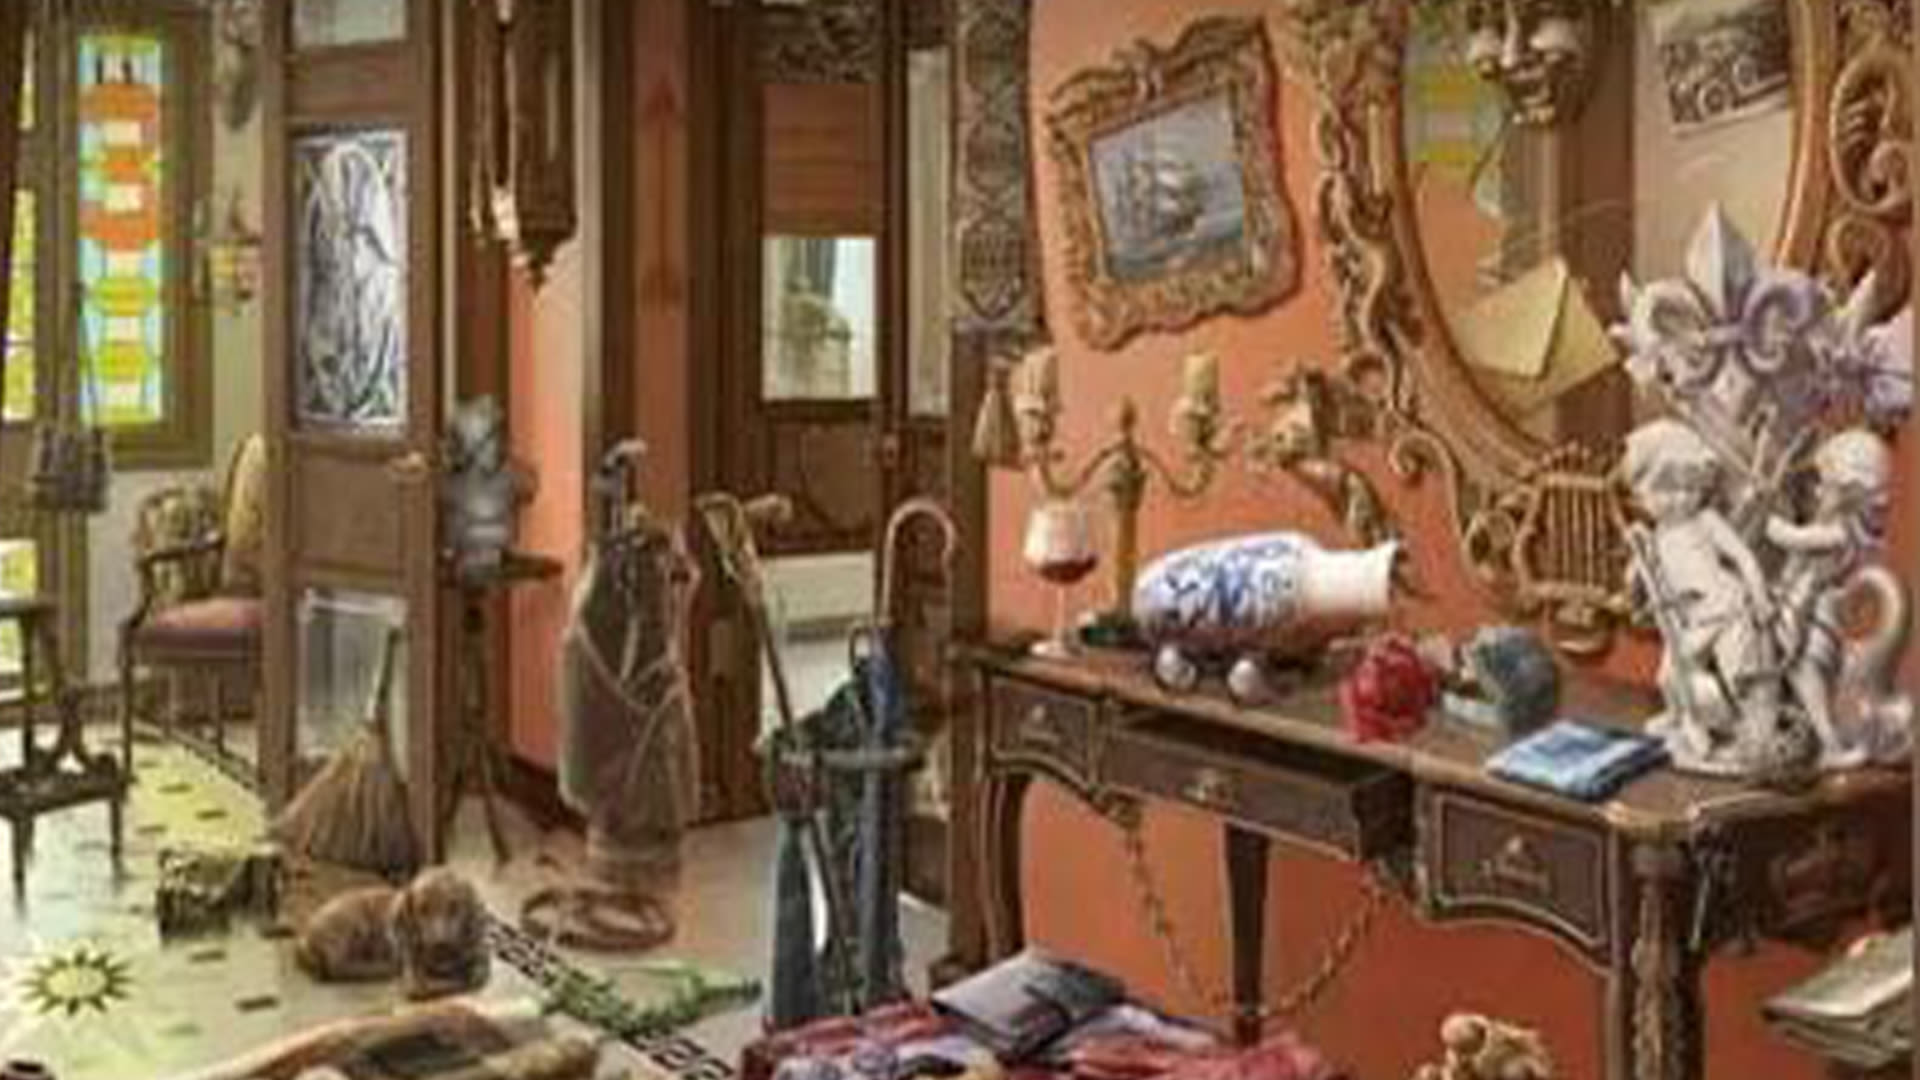 Everyone sees the mirror & the vase but can you spot the hidden cat in 8 secs?